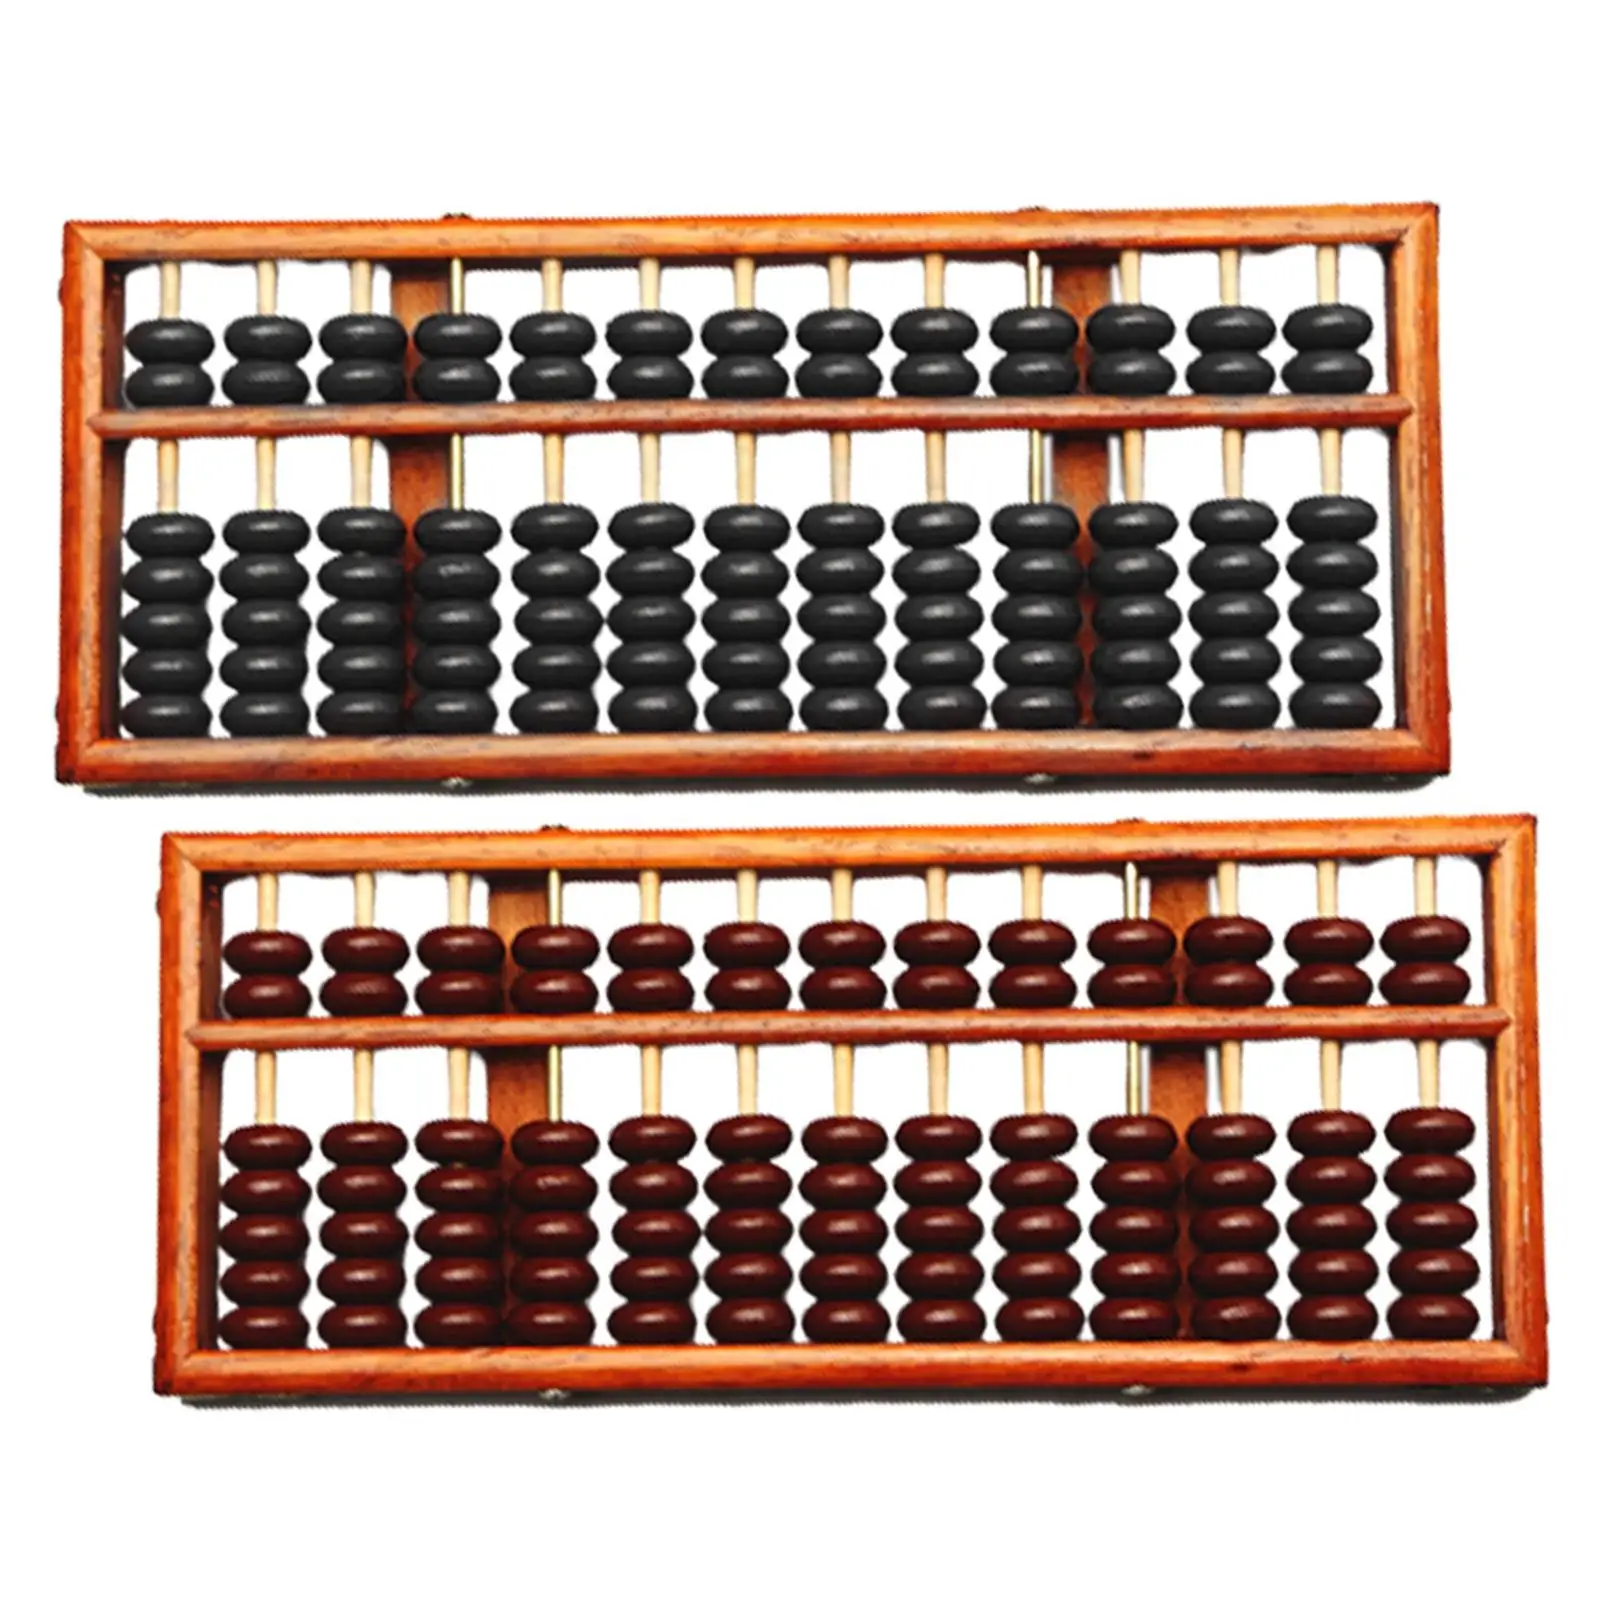 13 digits Rods Chinese Wood Bead Arithmetic Abacus Counting Tool Ornament